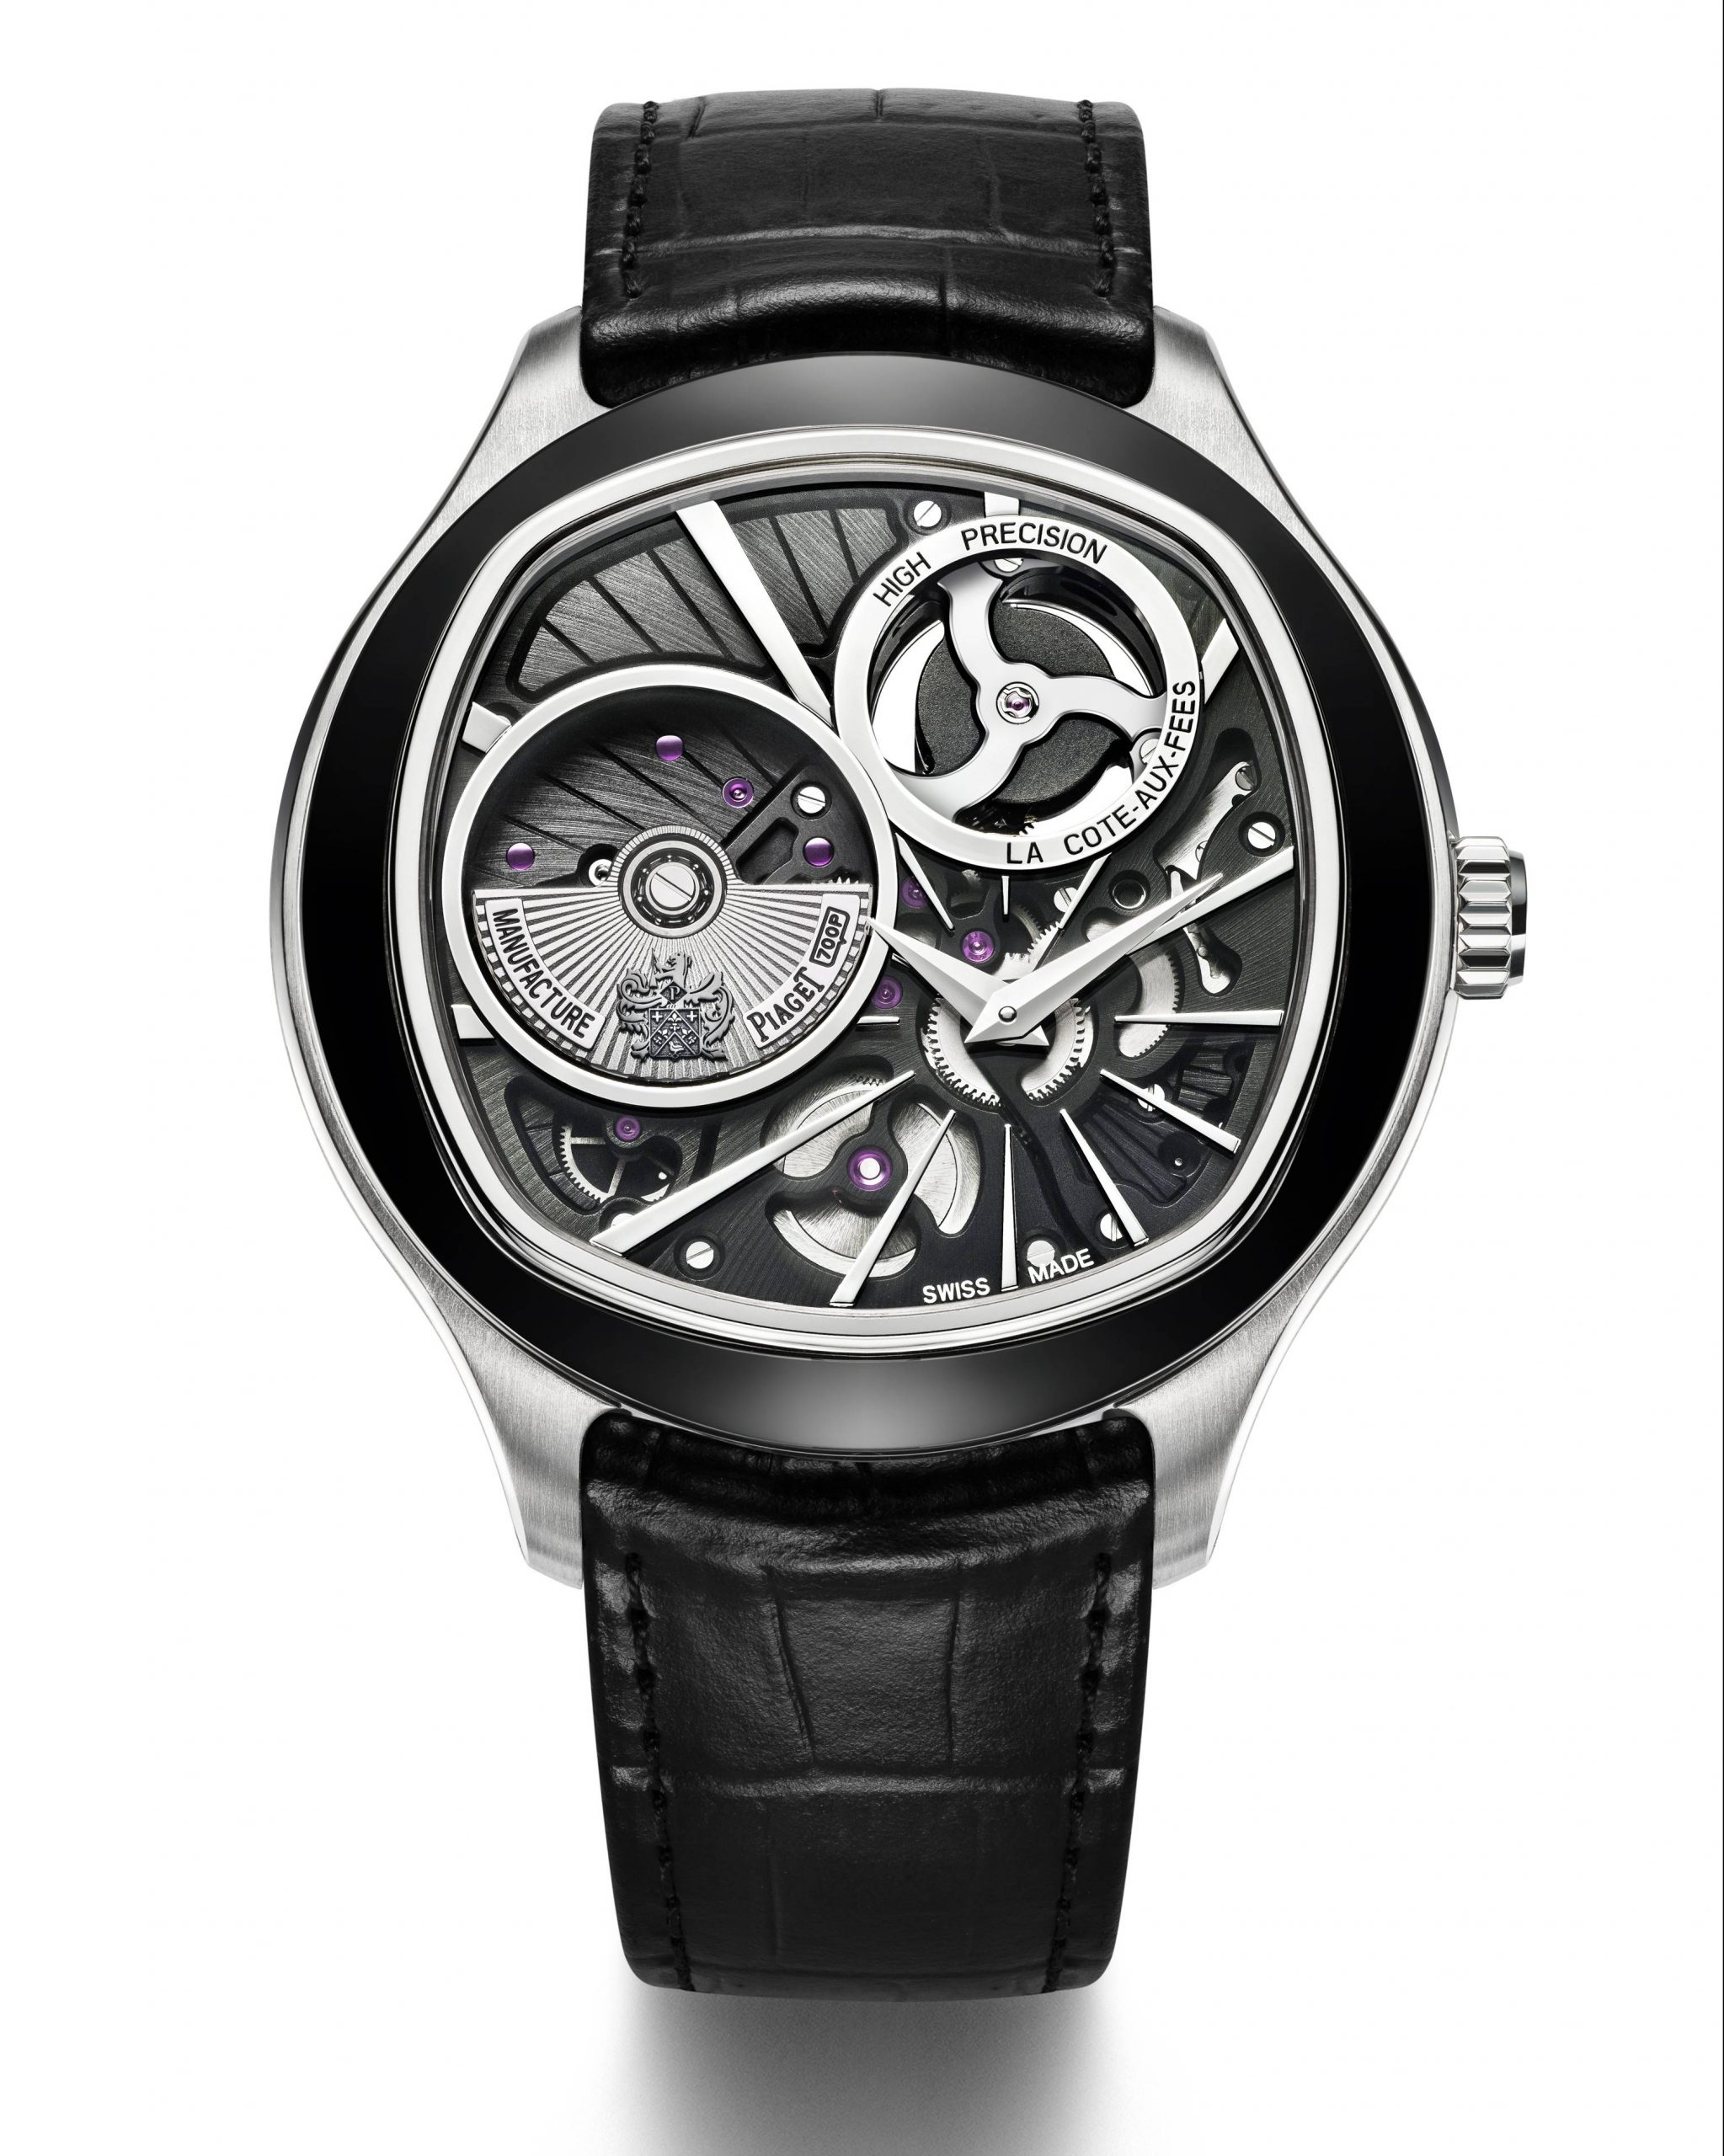 Piaget Introduces Two New Pieces Ahead Of SIHH 2016